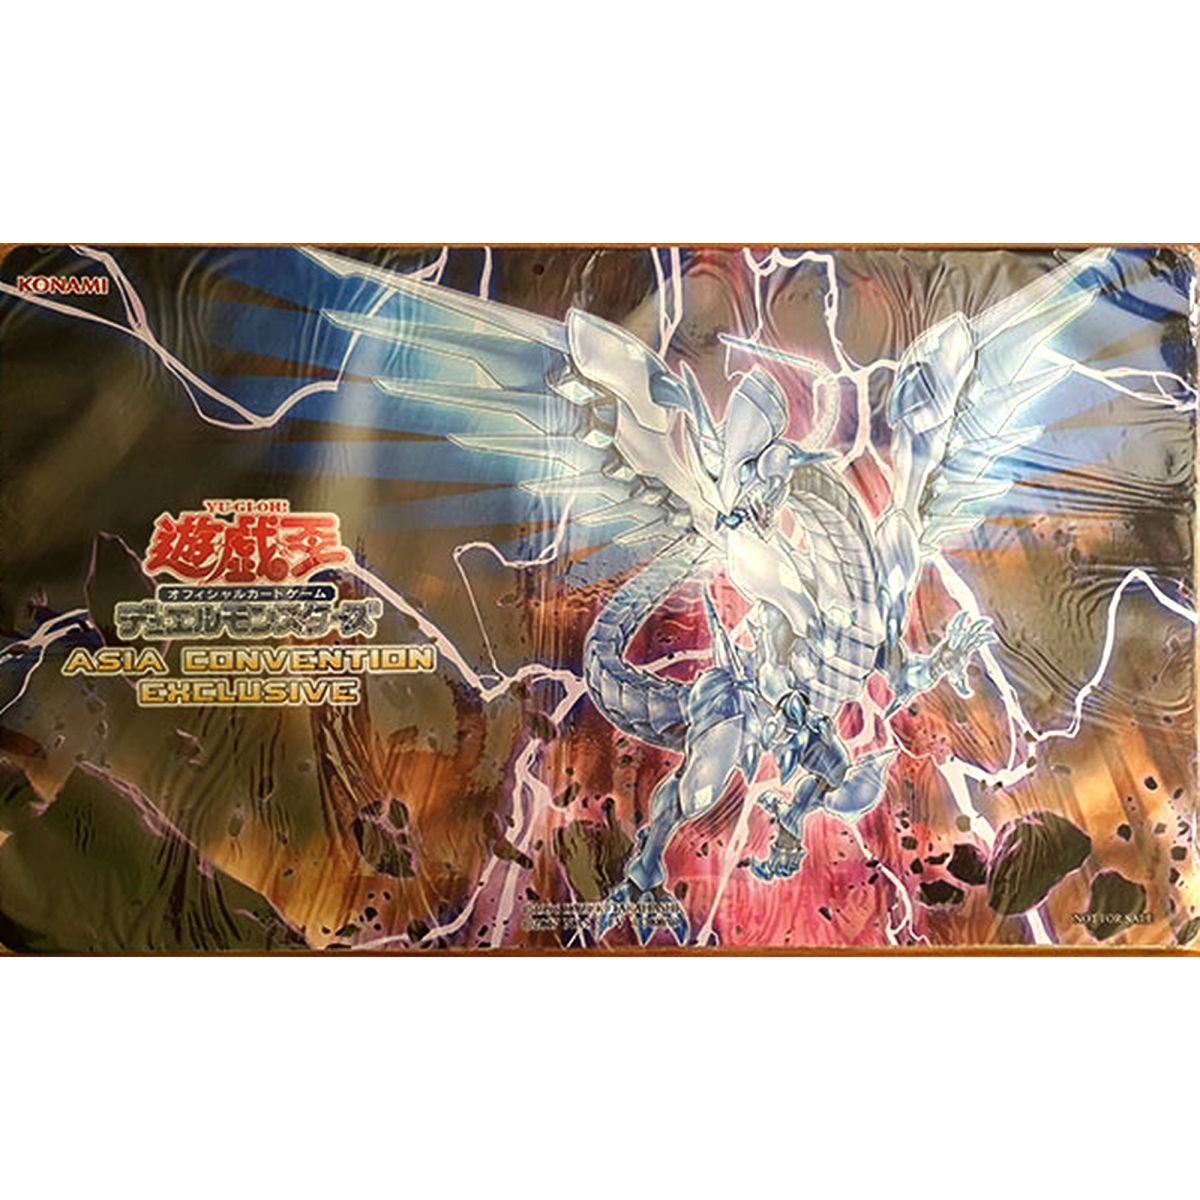 Yu Gi Oh! - Playmat - Asia Convention Exclusive "Blue-Eyes Chaos Dragon" - OCG *SEALED*